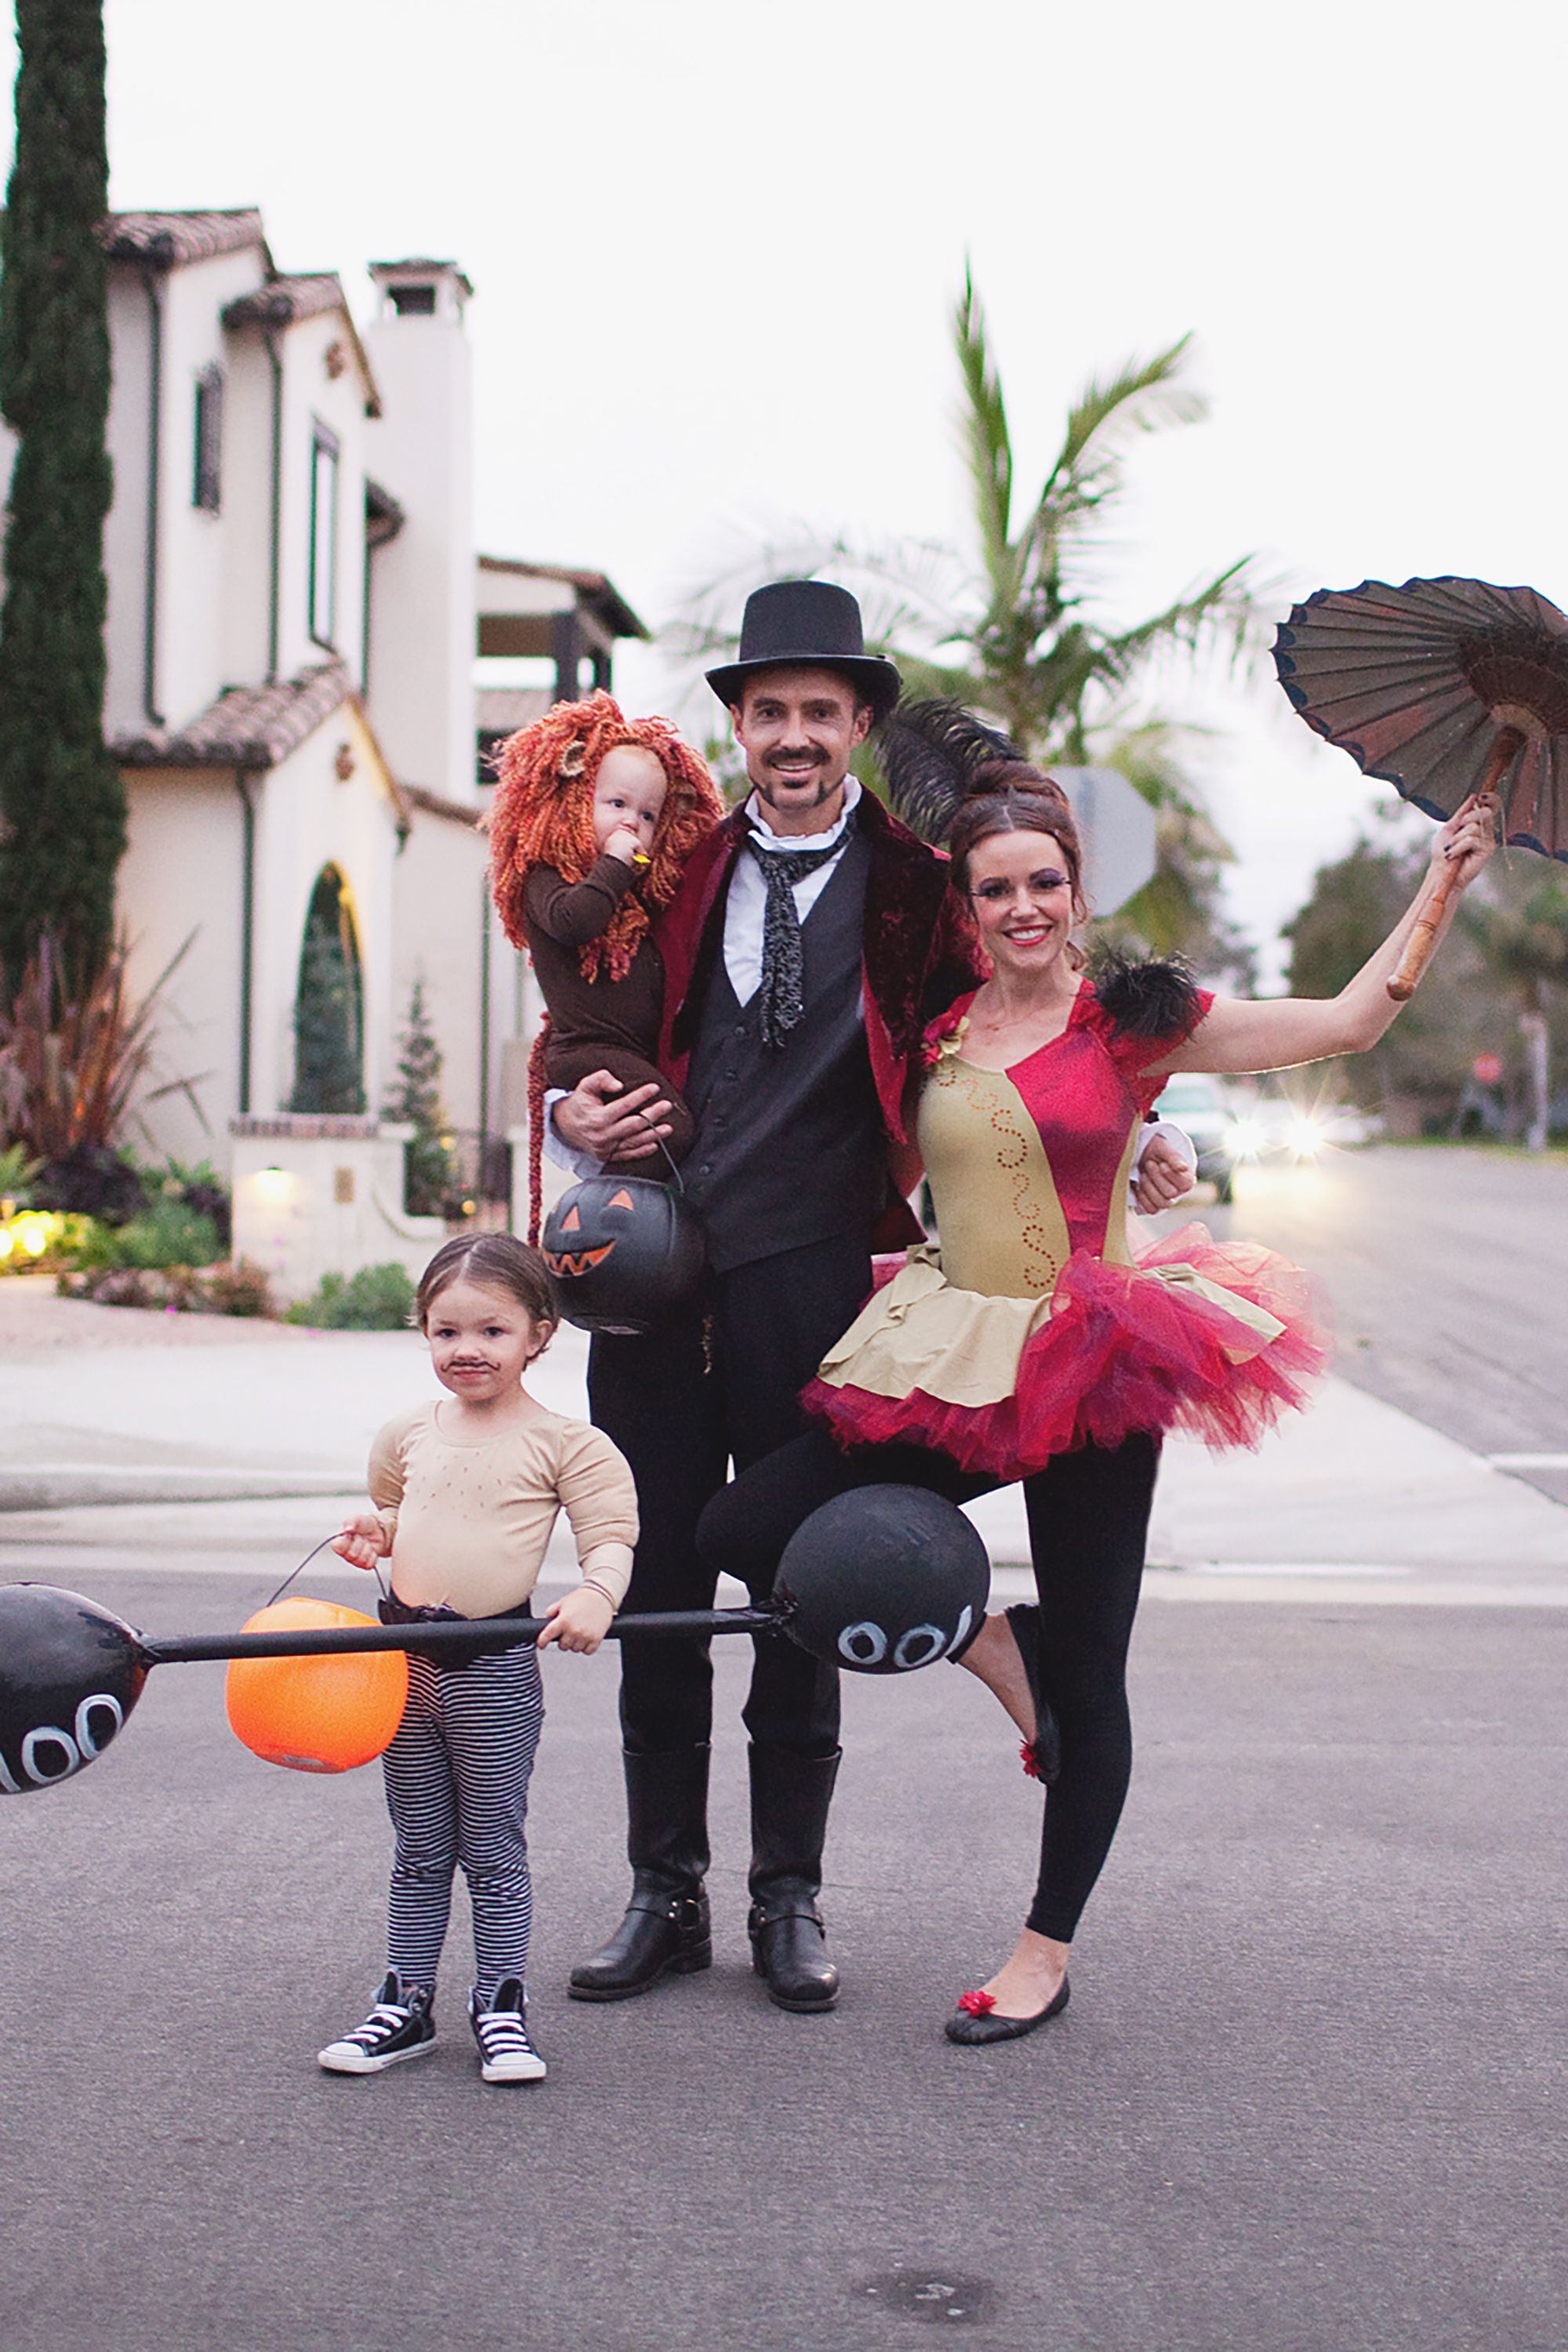 40 Best Family Halloween Costumes 2018 - Cute Ideas for Themed